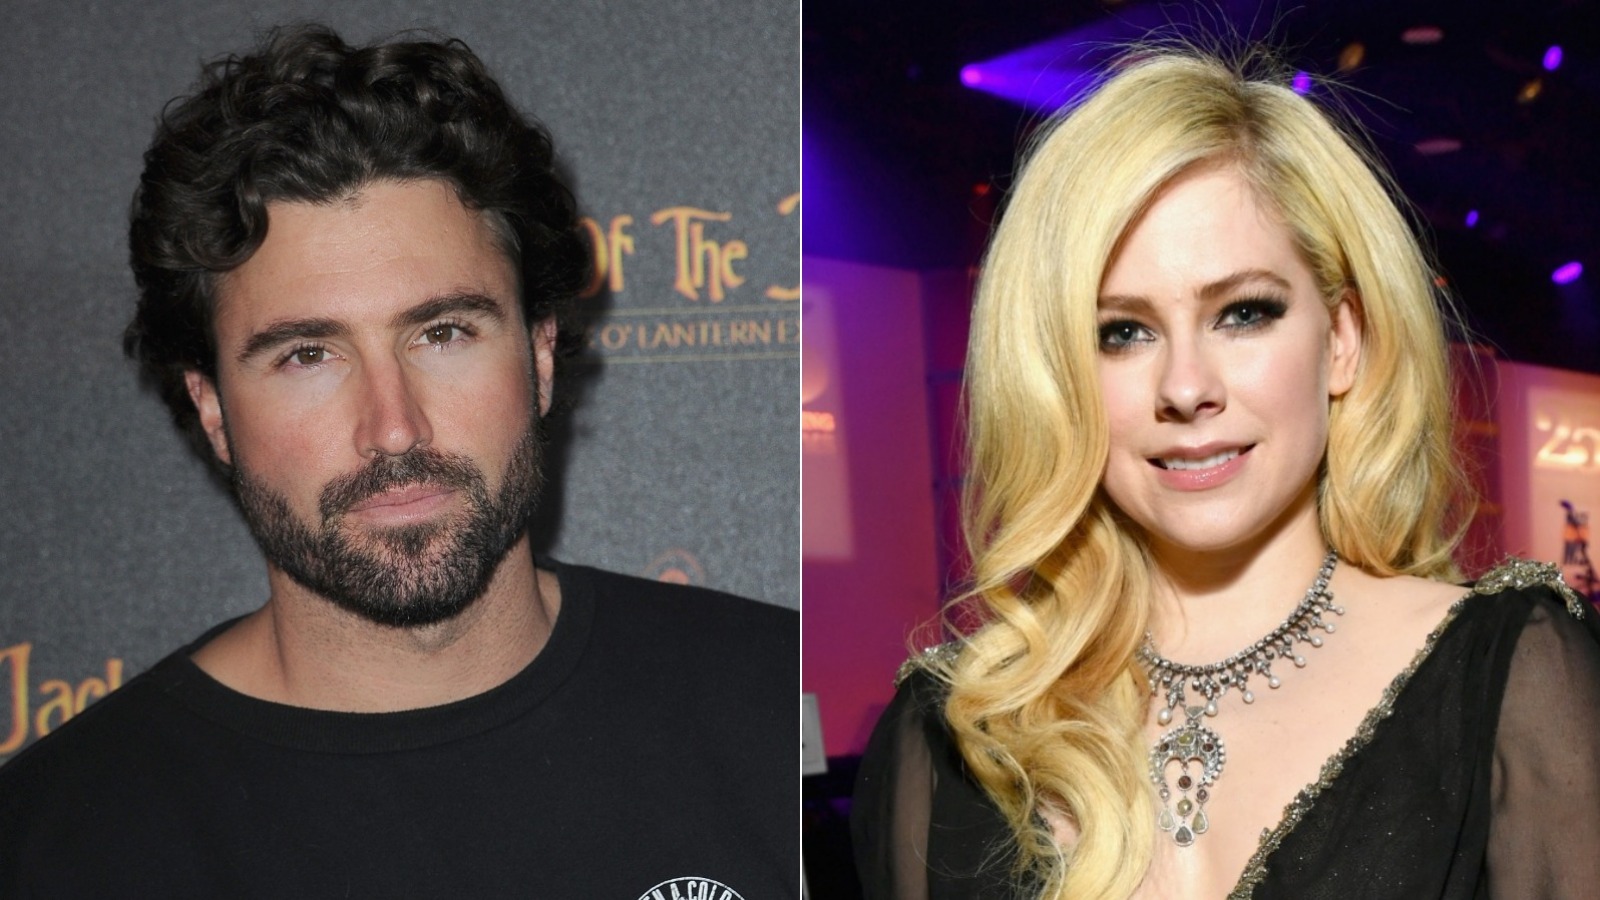 The Real Reason Brody Jenner And Avril Lavigne Couldn't Make It Work